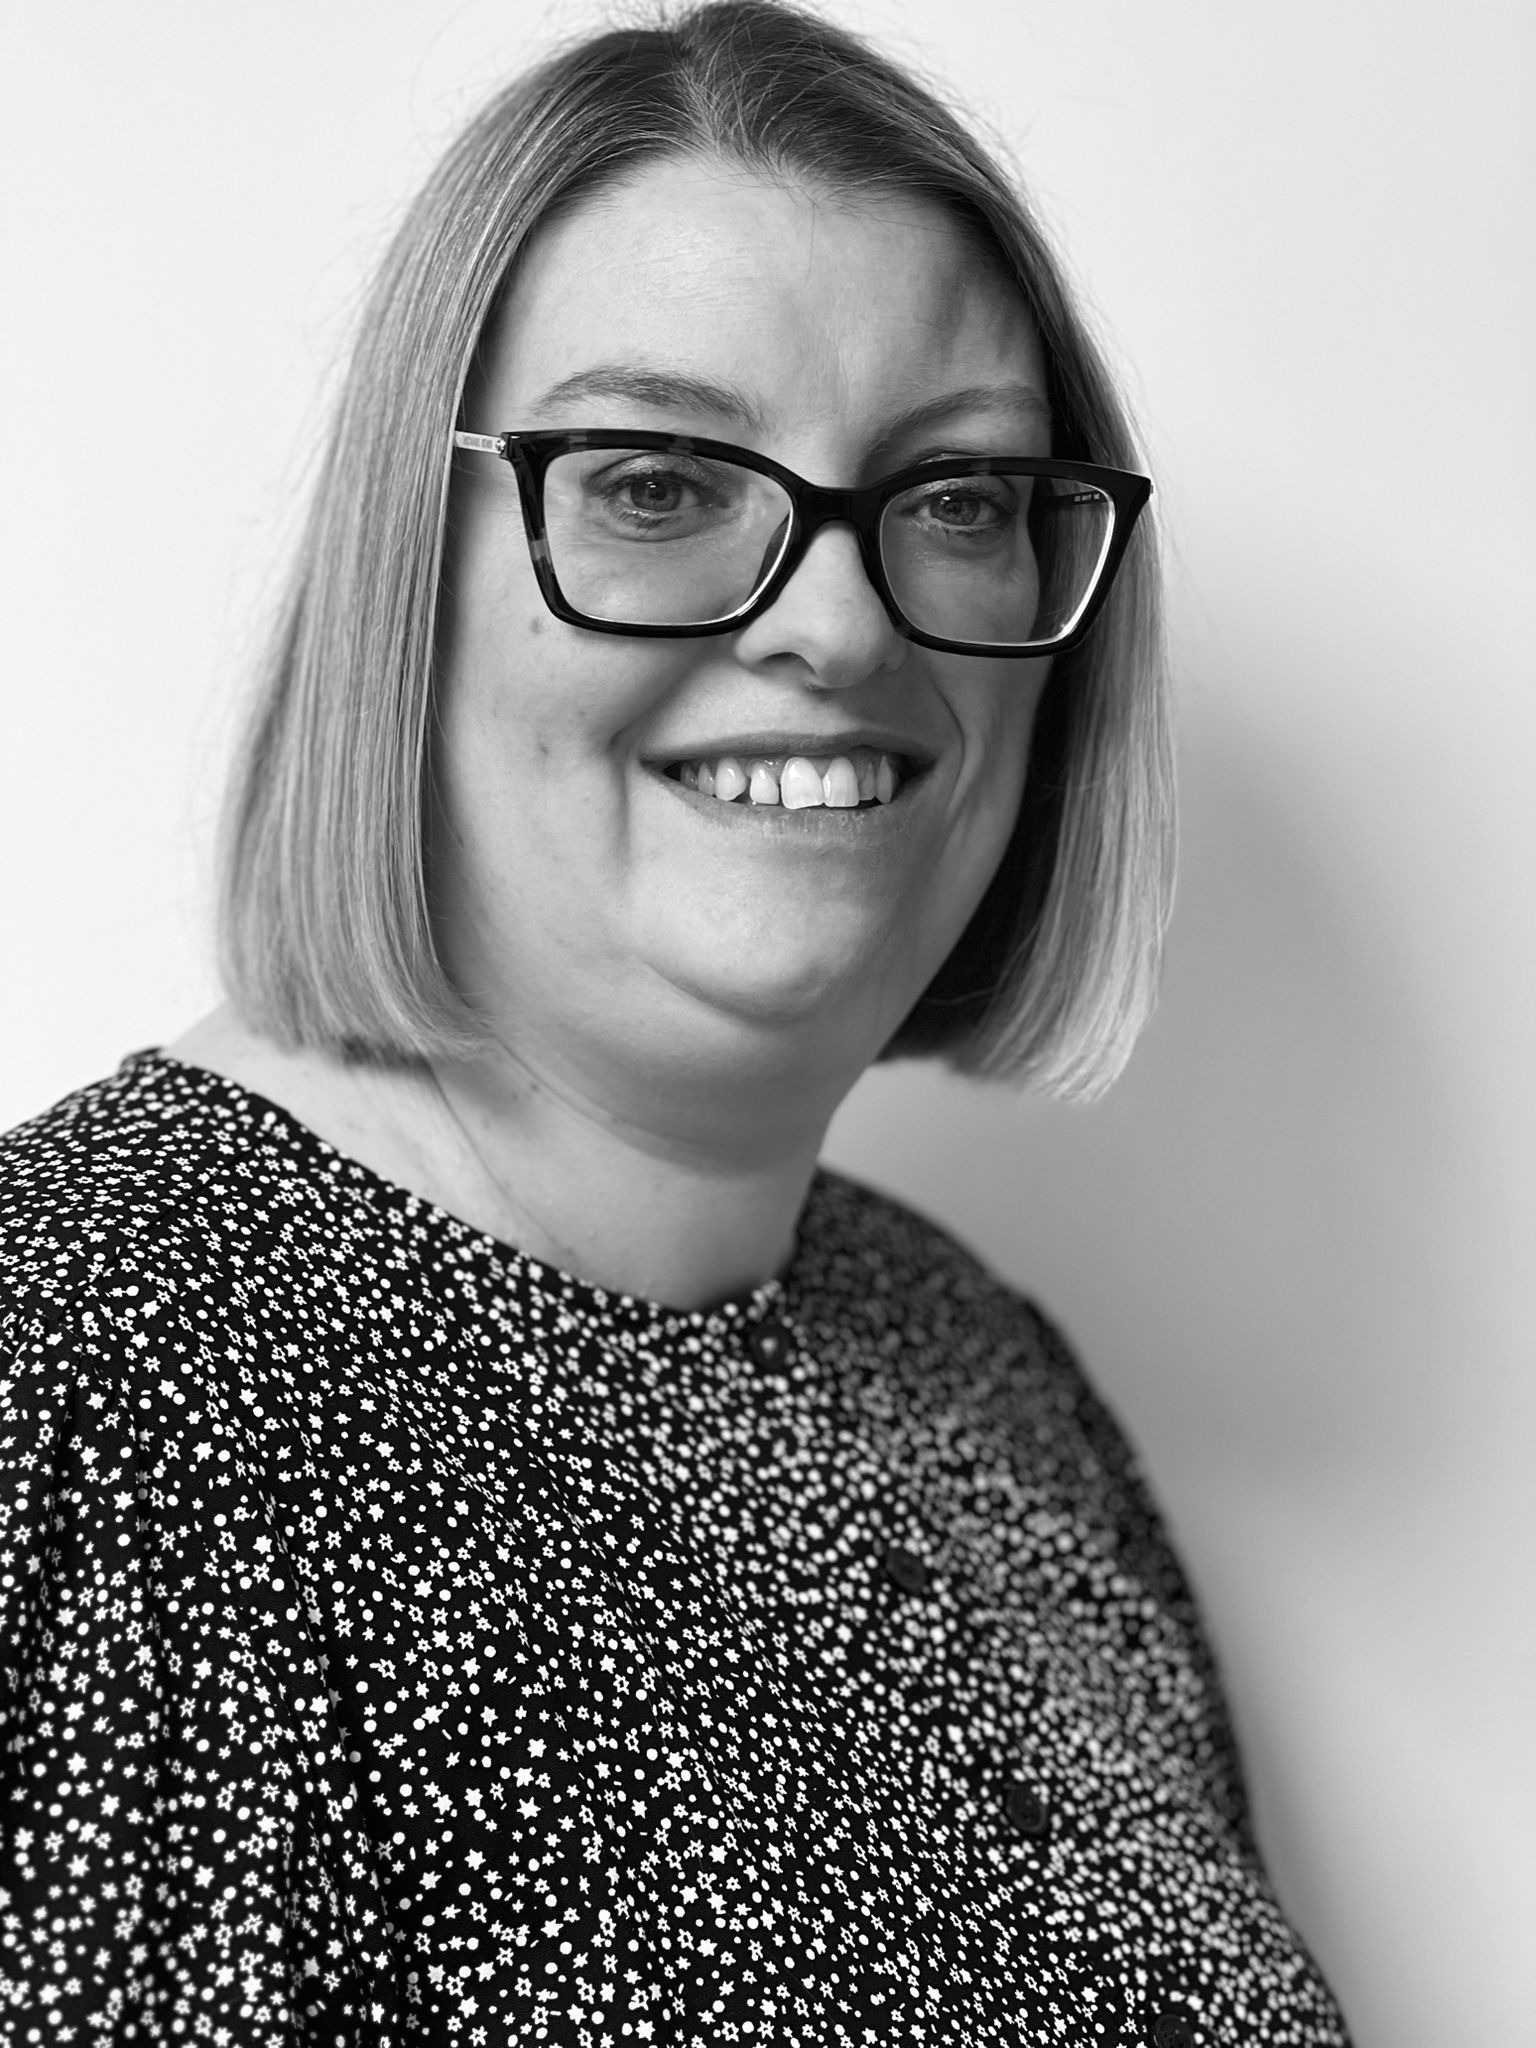 Melissa Thomas - Melissa is the owner and one of the original founders in 2008 of Thomas and Thomas Solicitors